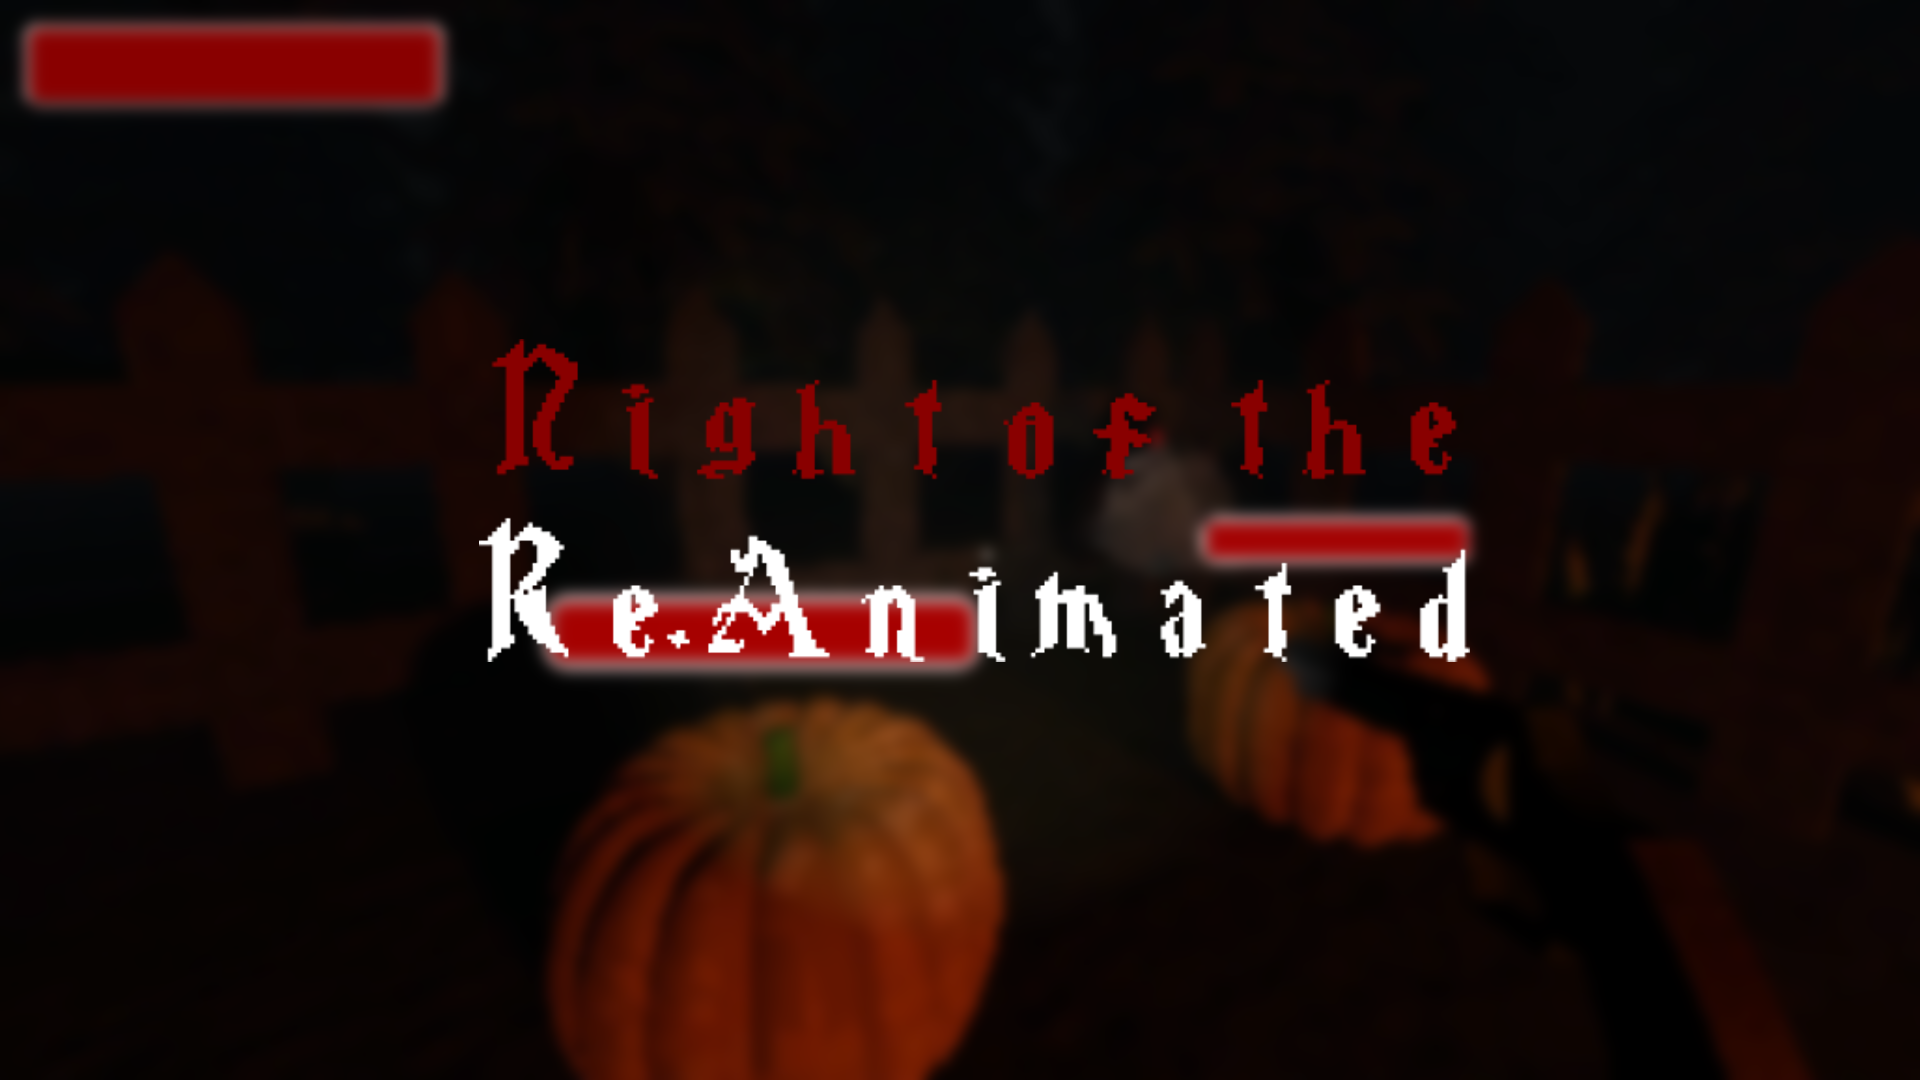 Night of the reanimated